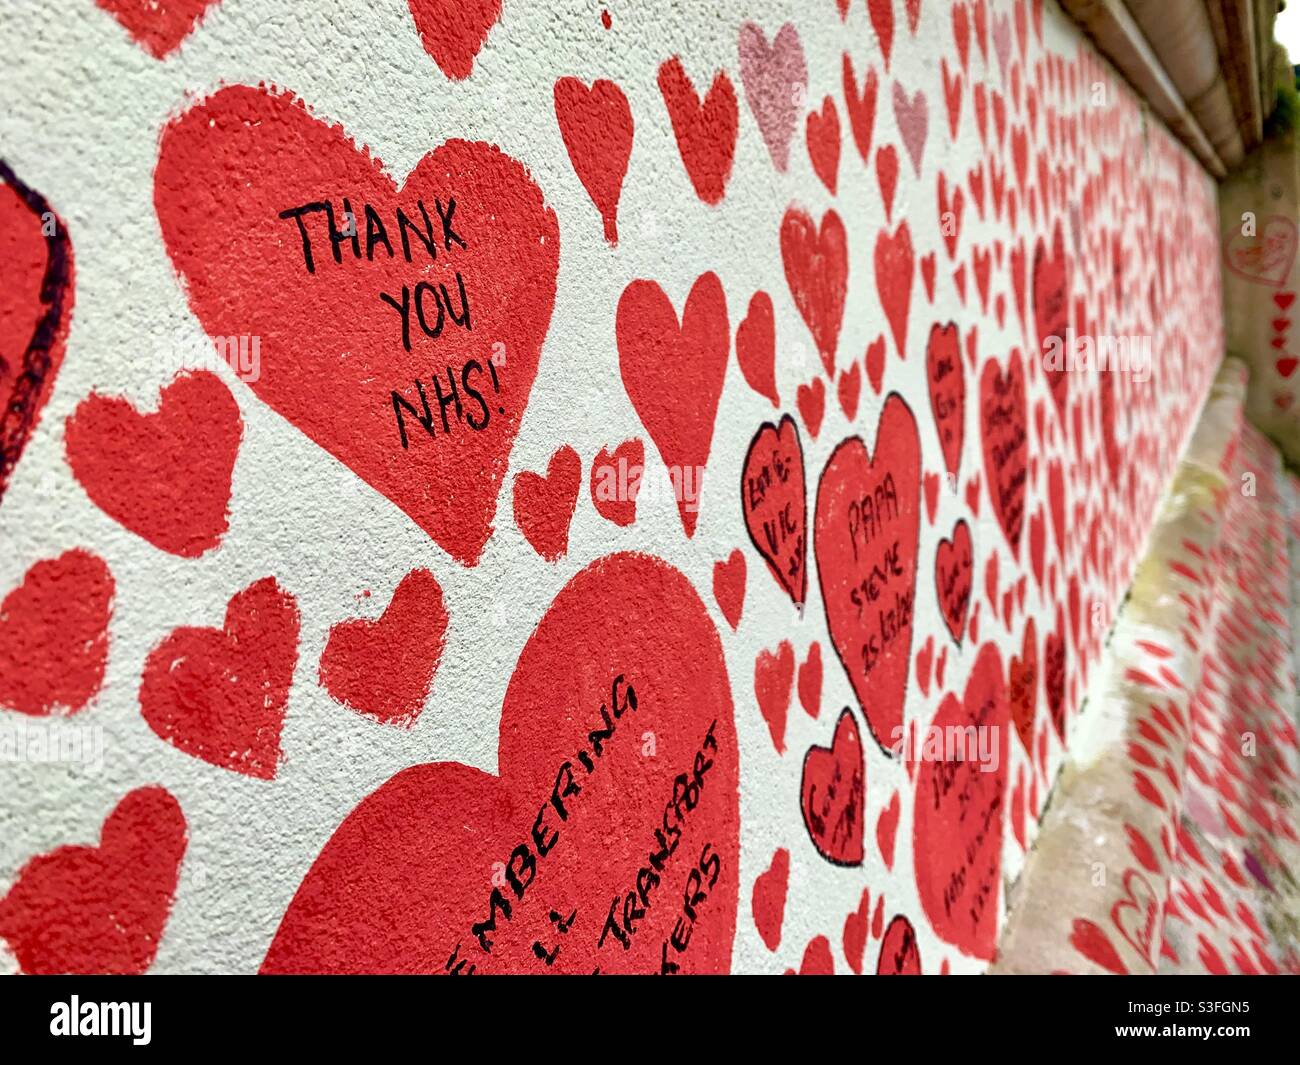 Covid-19 wall in Westminster - Thank you NHS Stock Photo